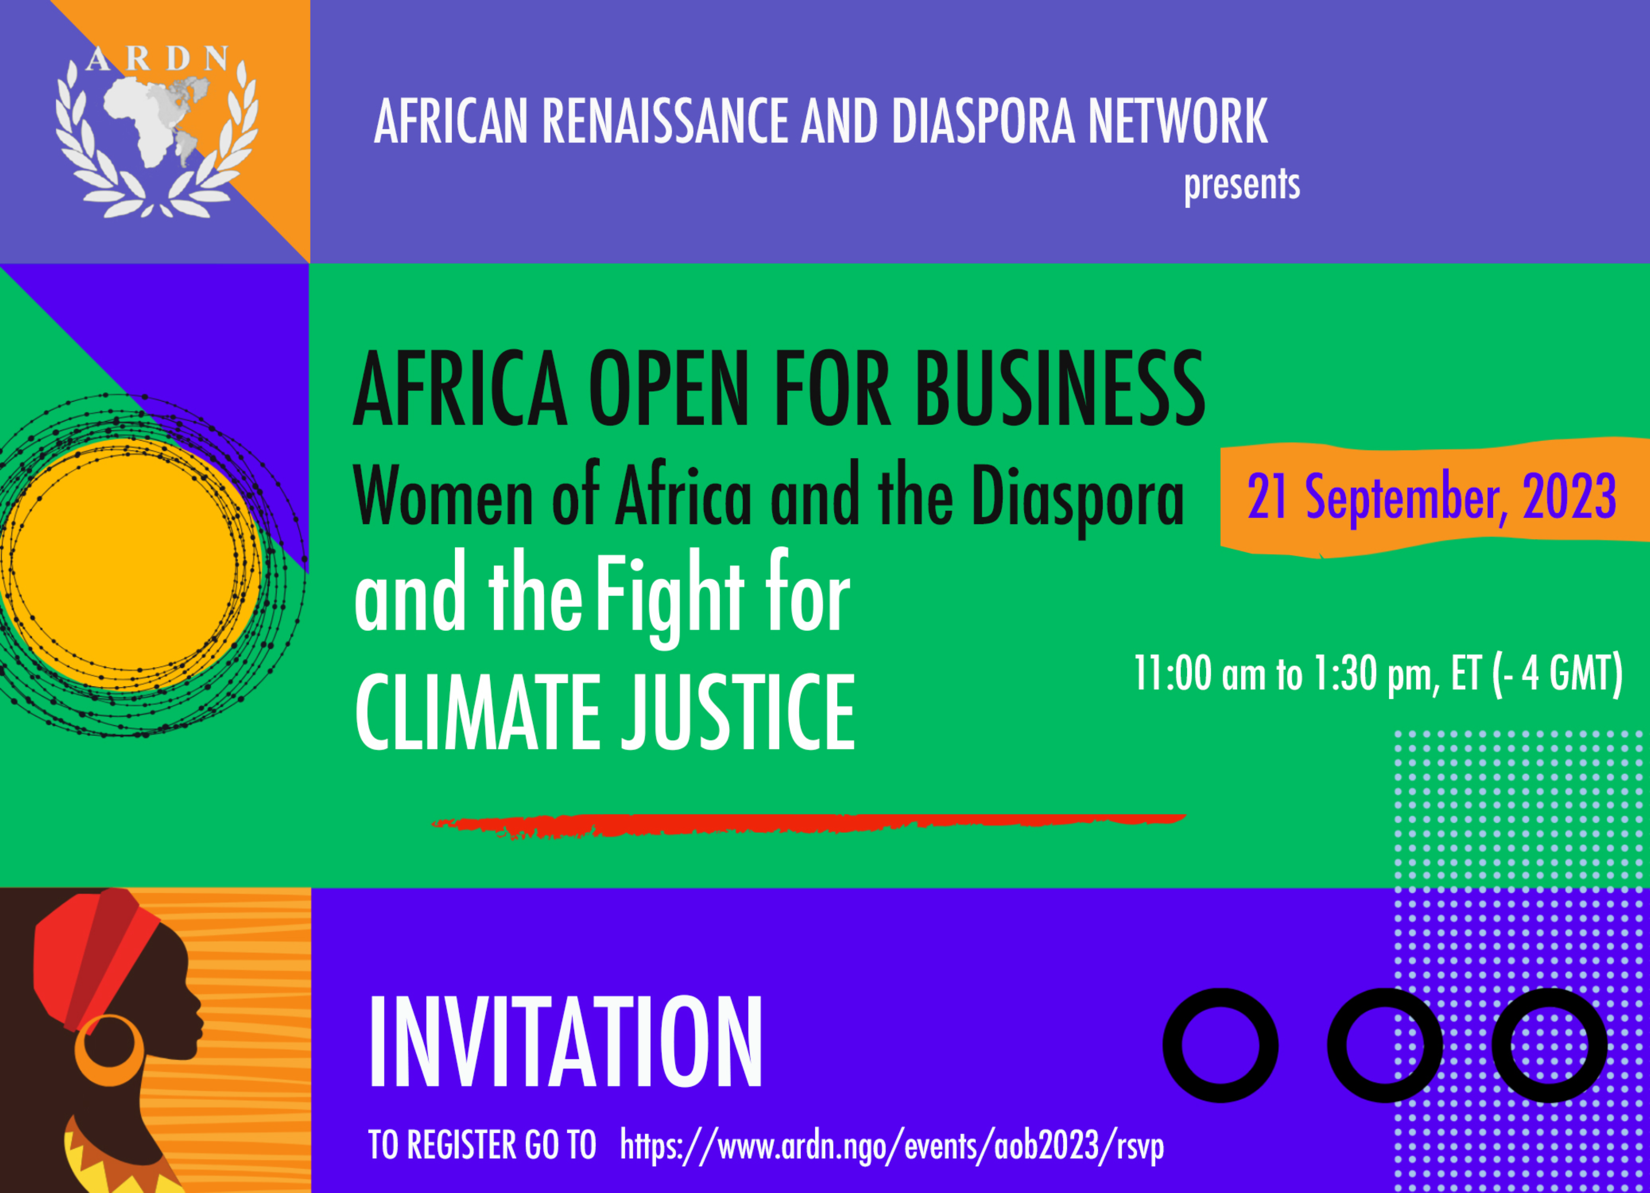 Africa Open for Business Summit, held on UNGA sidelines, focuses on women’s leadership